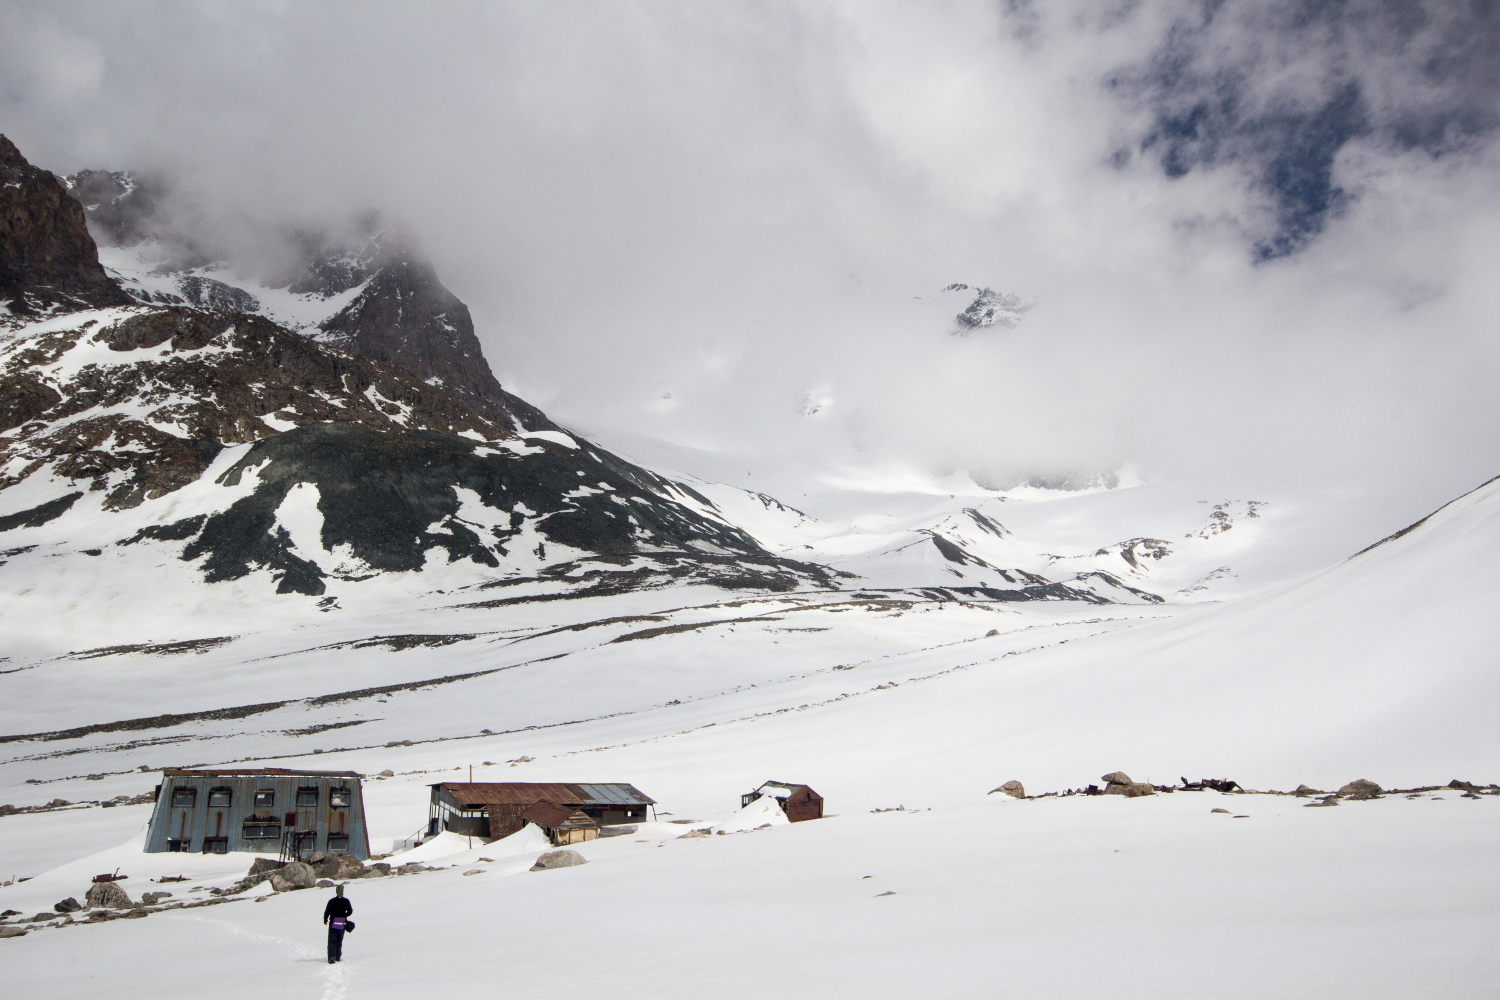 The former Soviet ski base at Ala-Archa offers truly remote snow adventures © Stephen Lioy / Lonely Planet